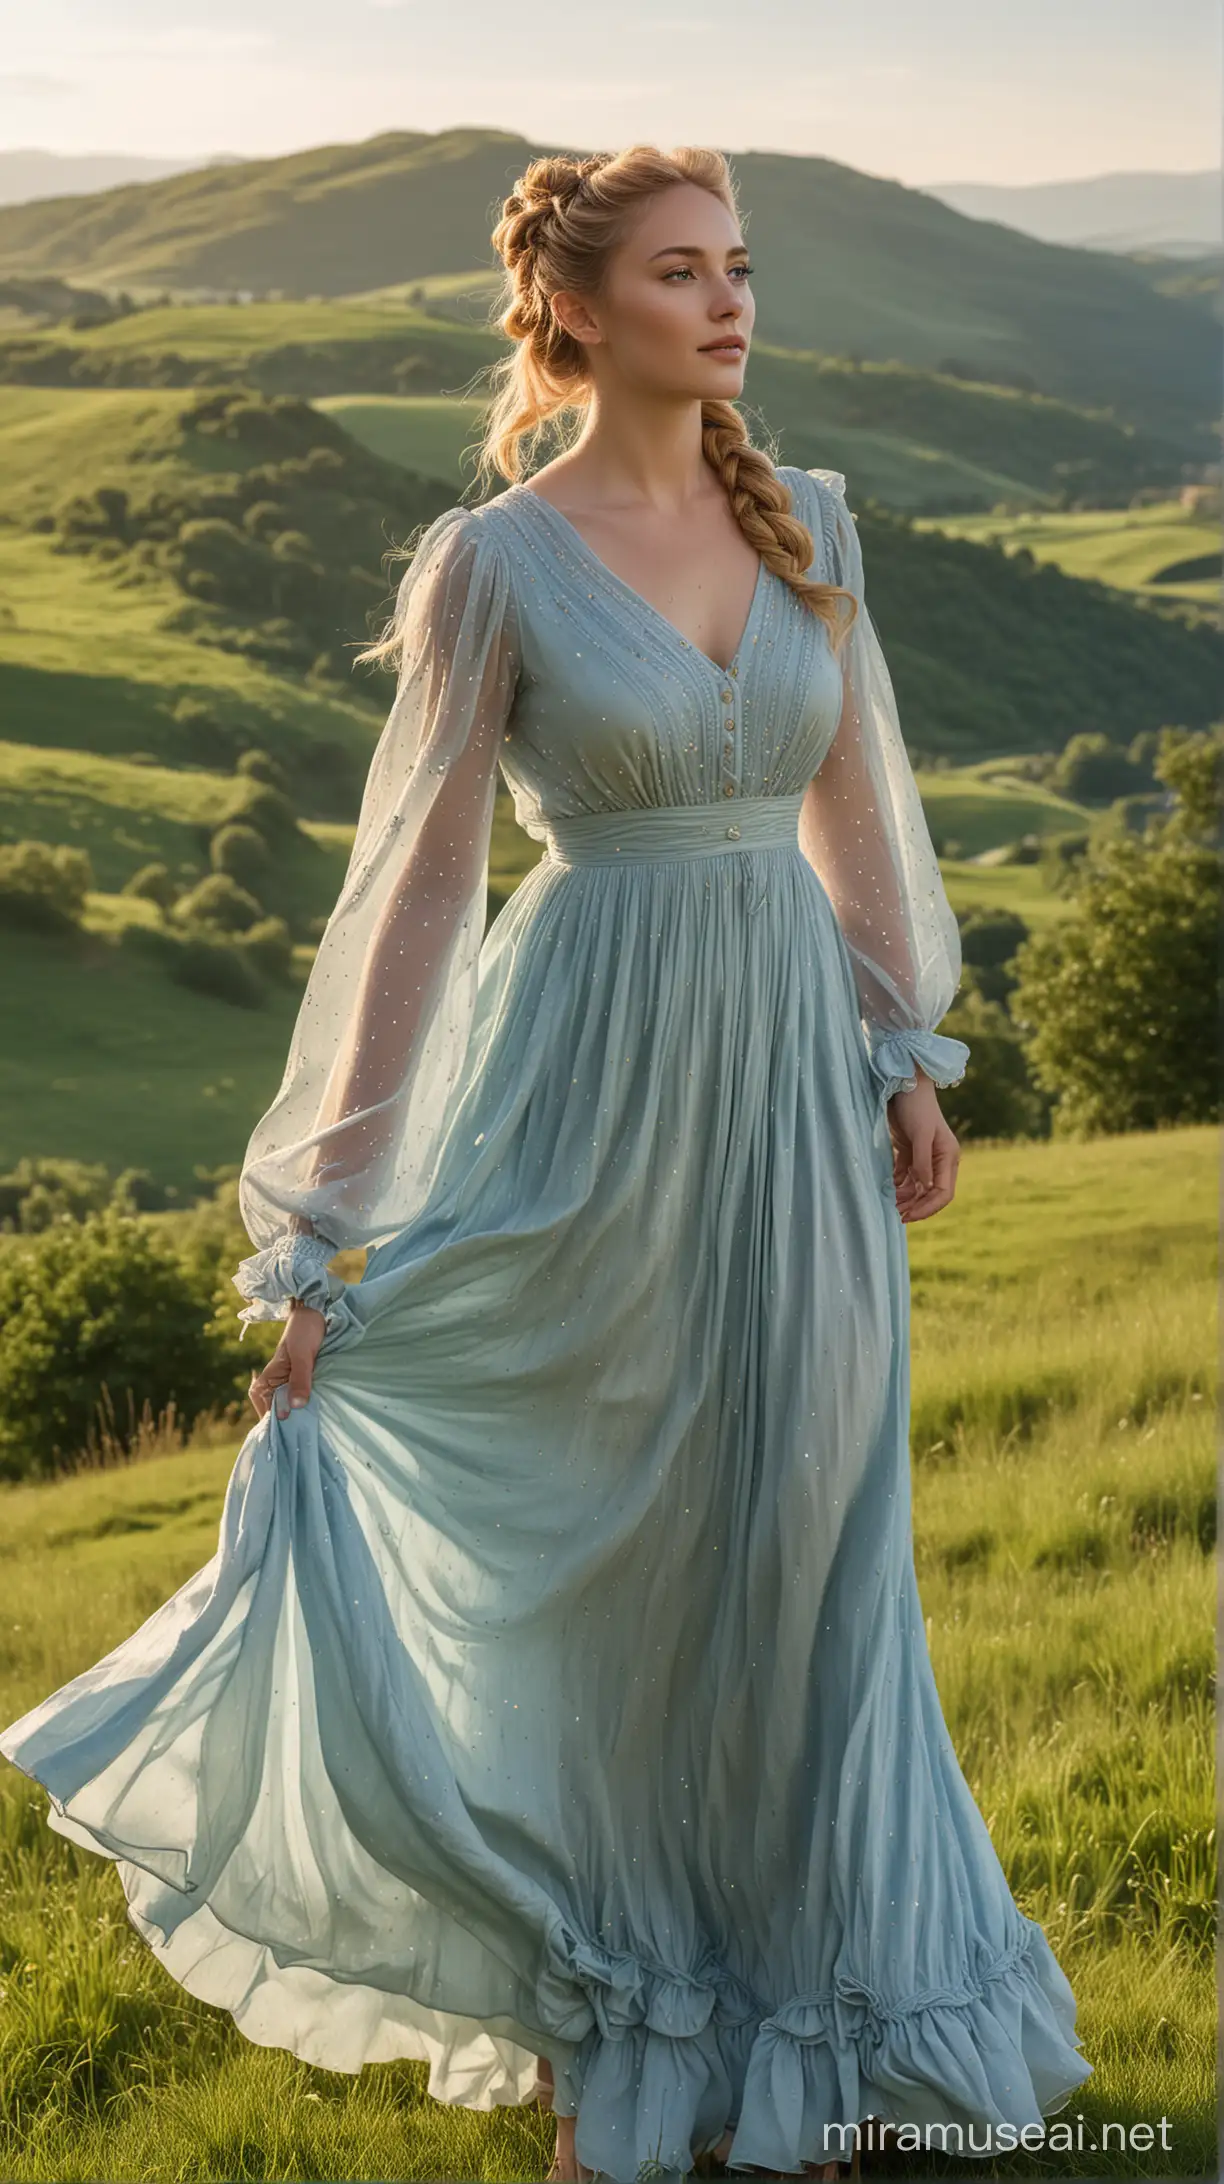 Fullbody view of a sriking young female in early 20s with voluminous golden hair braided up into two buns, dressed in an elegant gown as blue as a clear summer sky, sparkling sheer sleeves cuffed at her wrists, and the end of the round, ruffled dress swaying at her feet. She is standing before lush green rolling hills.